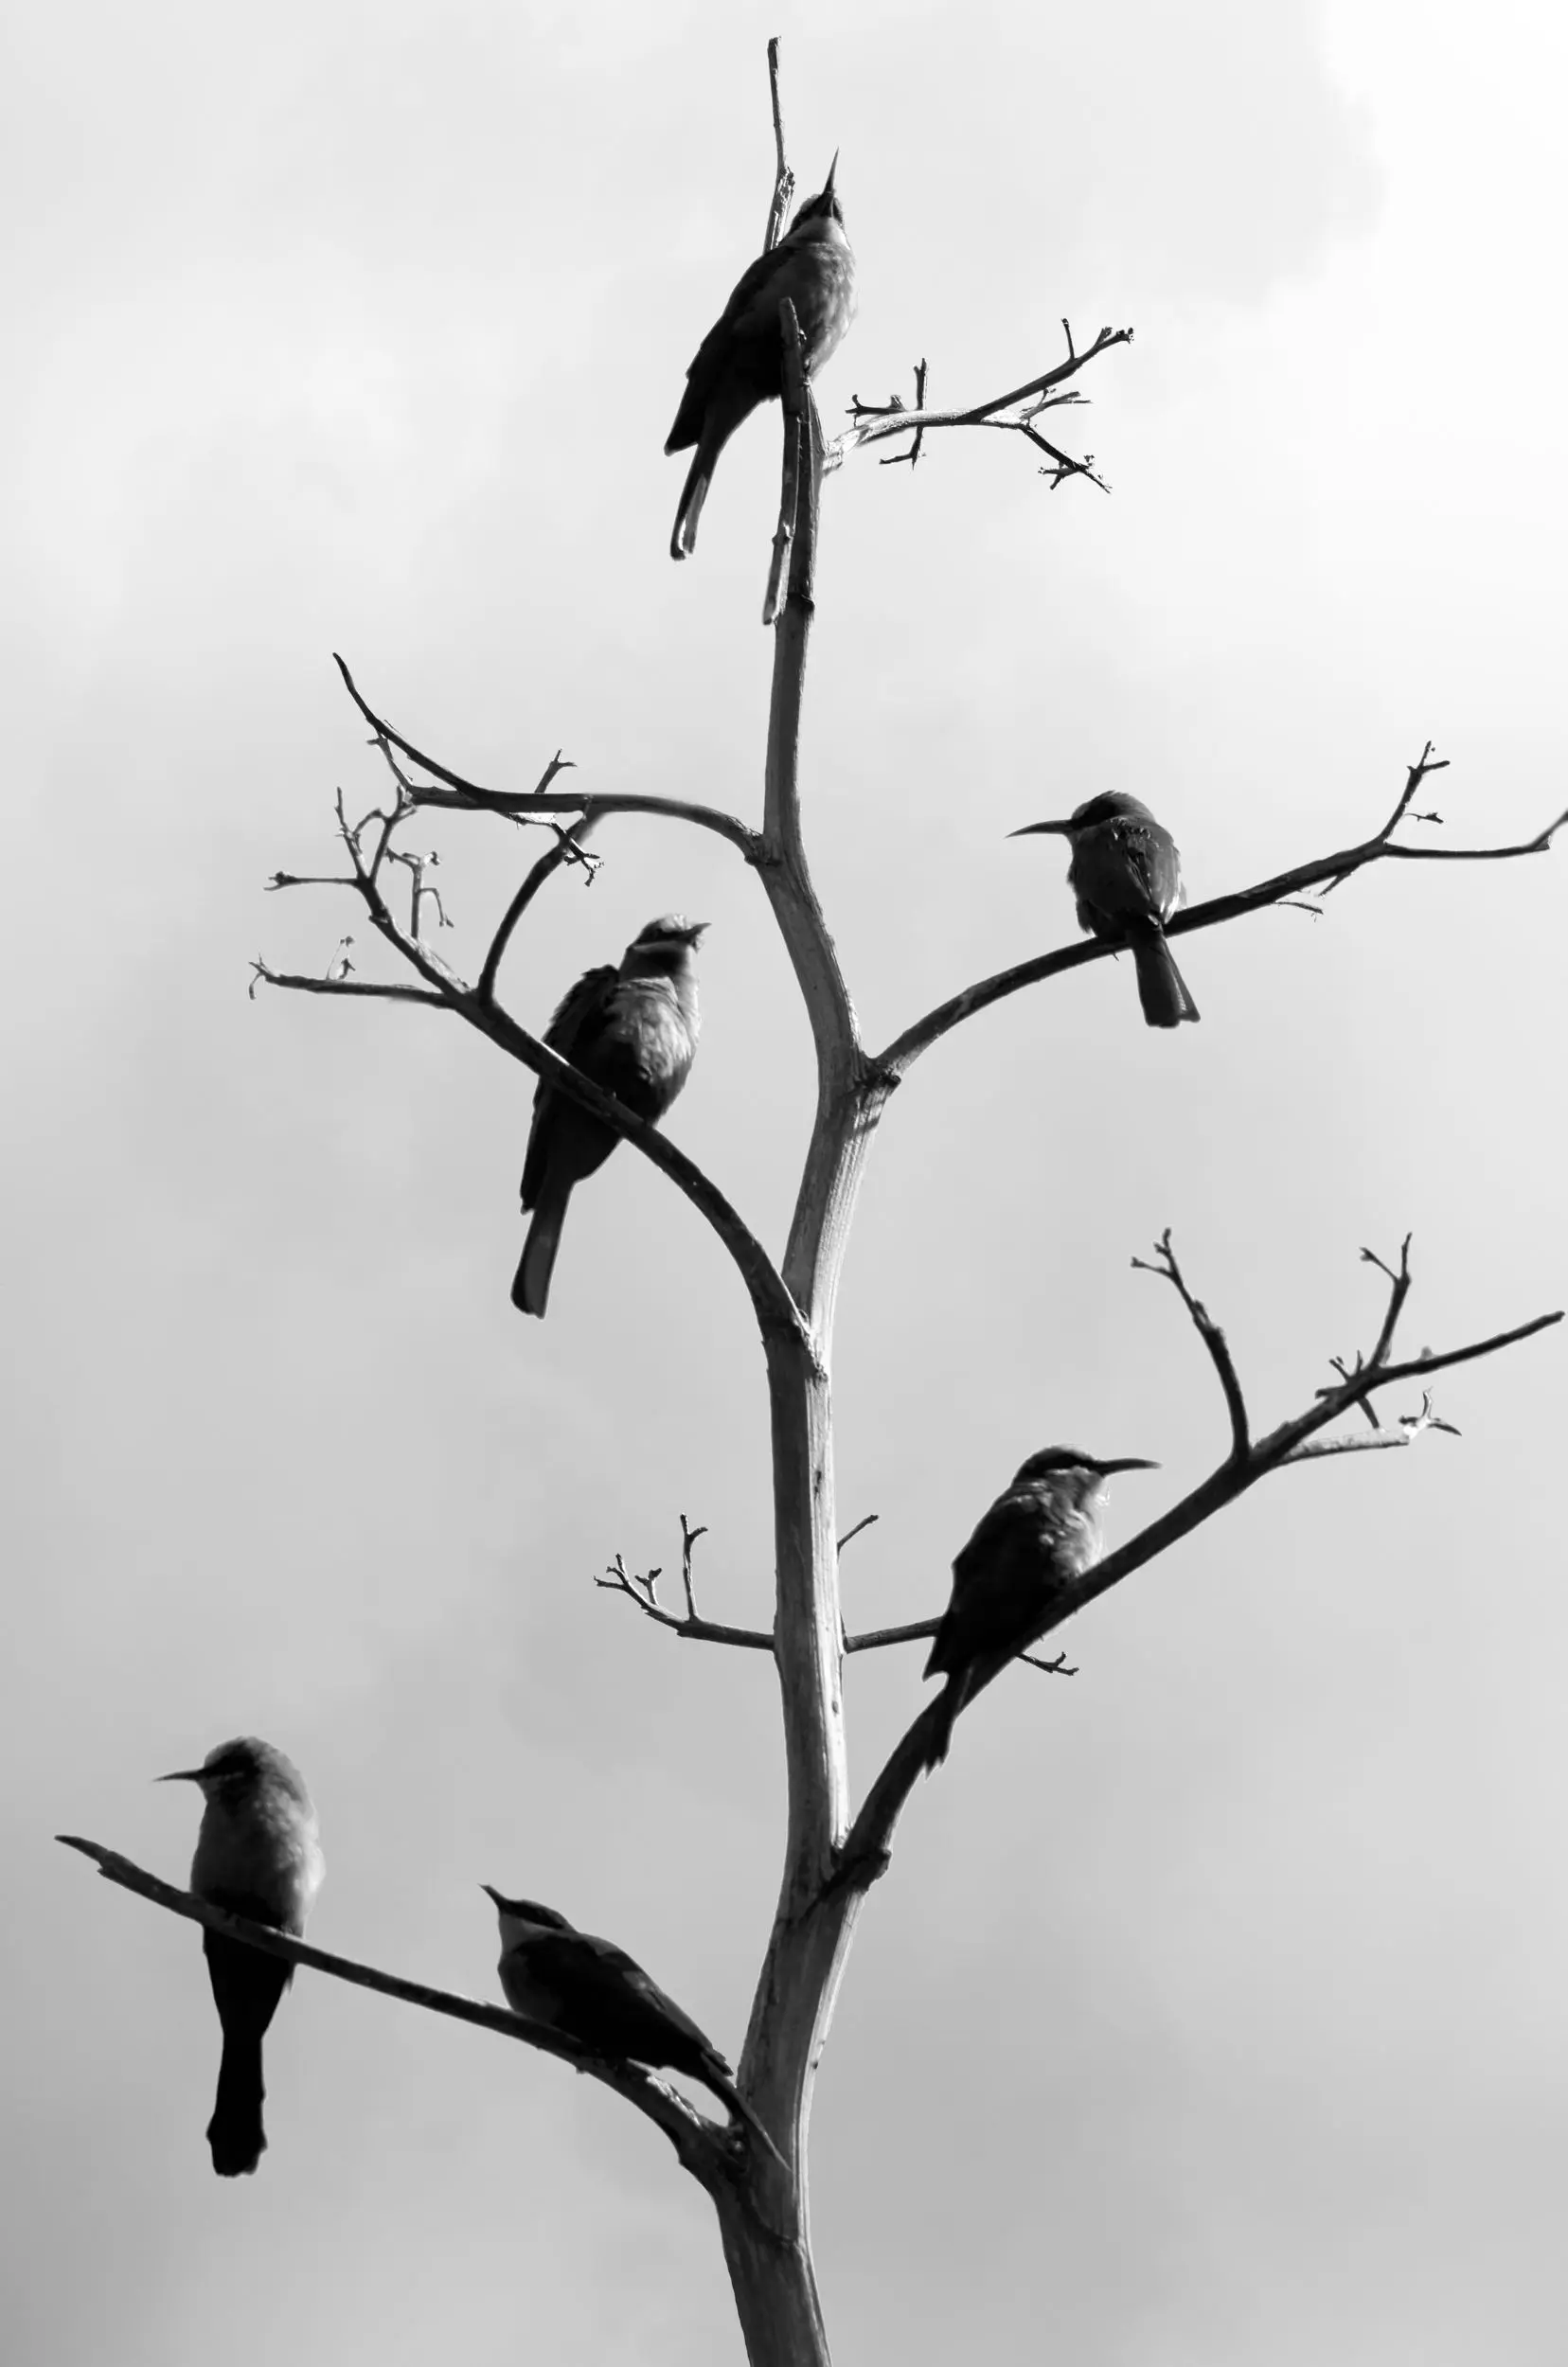 Multiple birds perch on various tree branches.